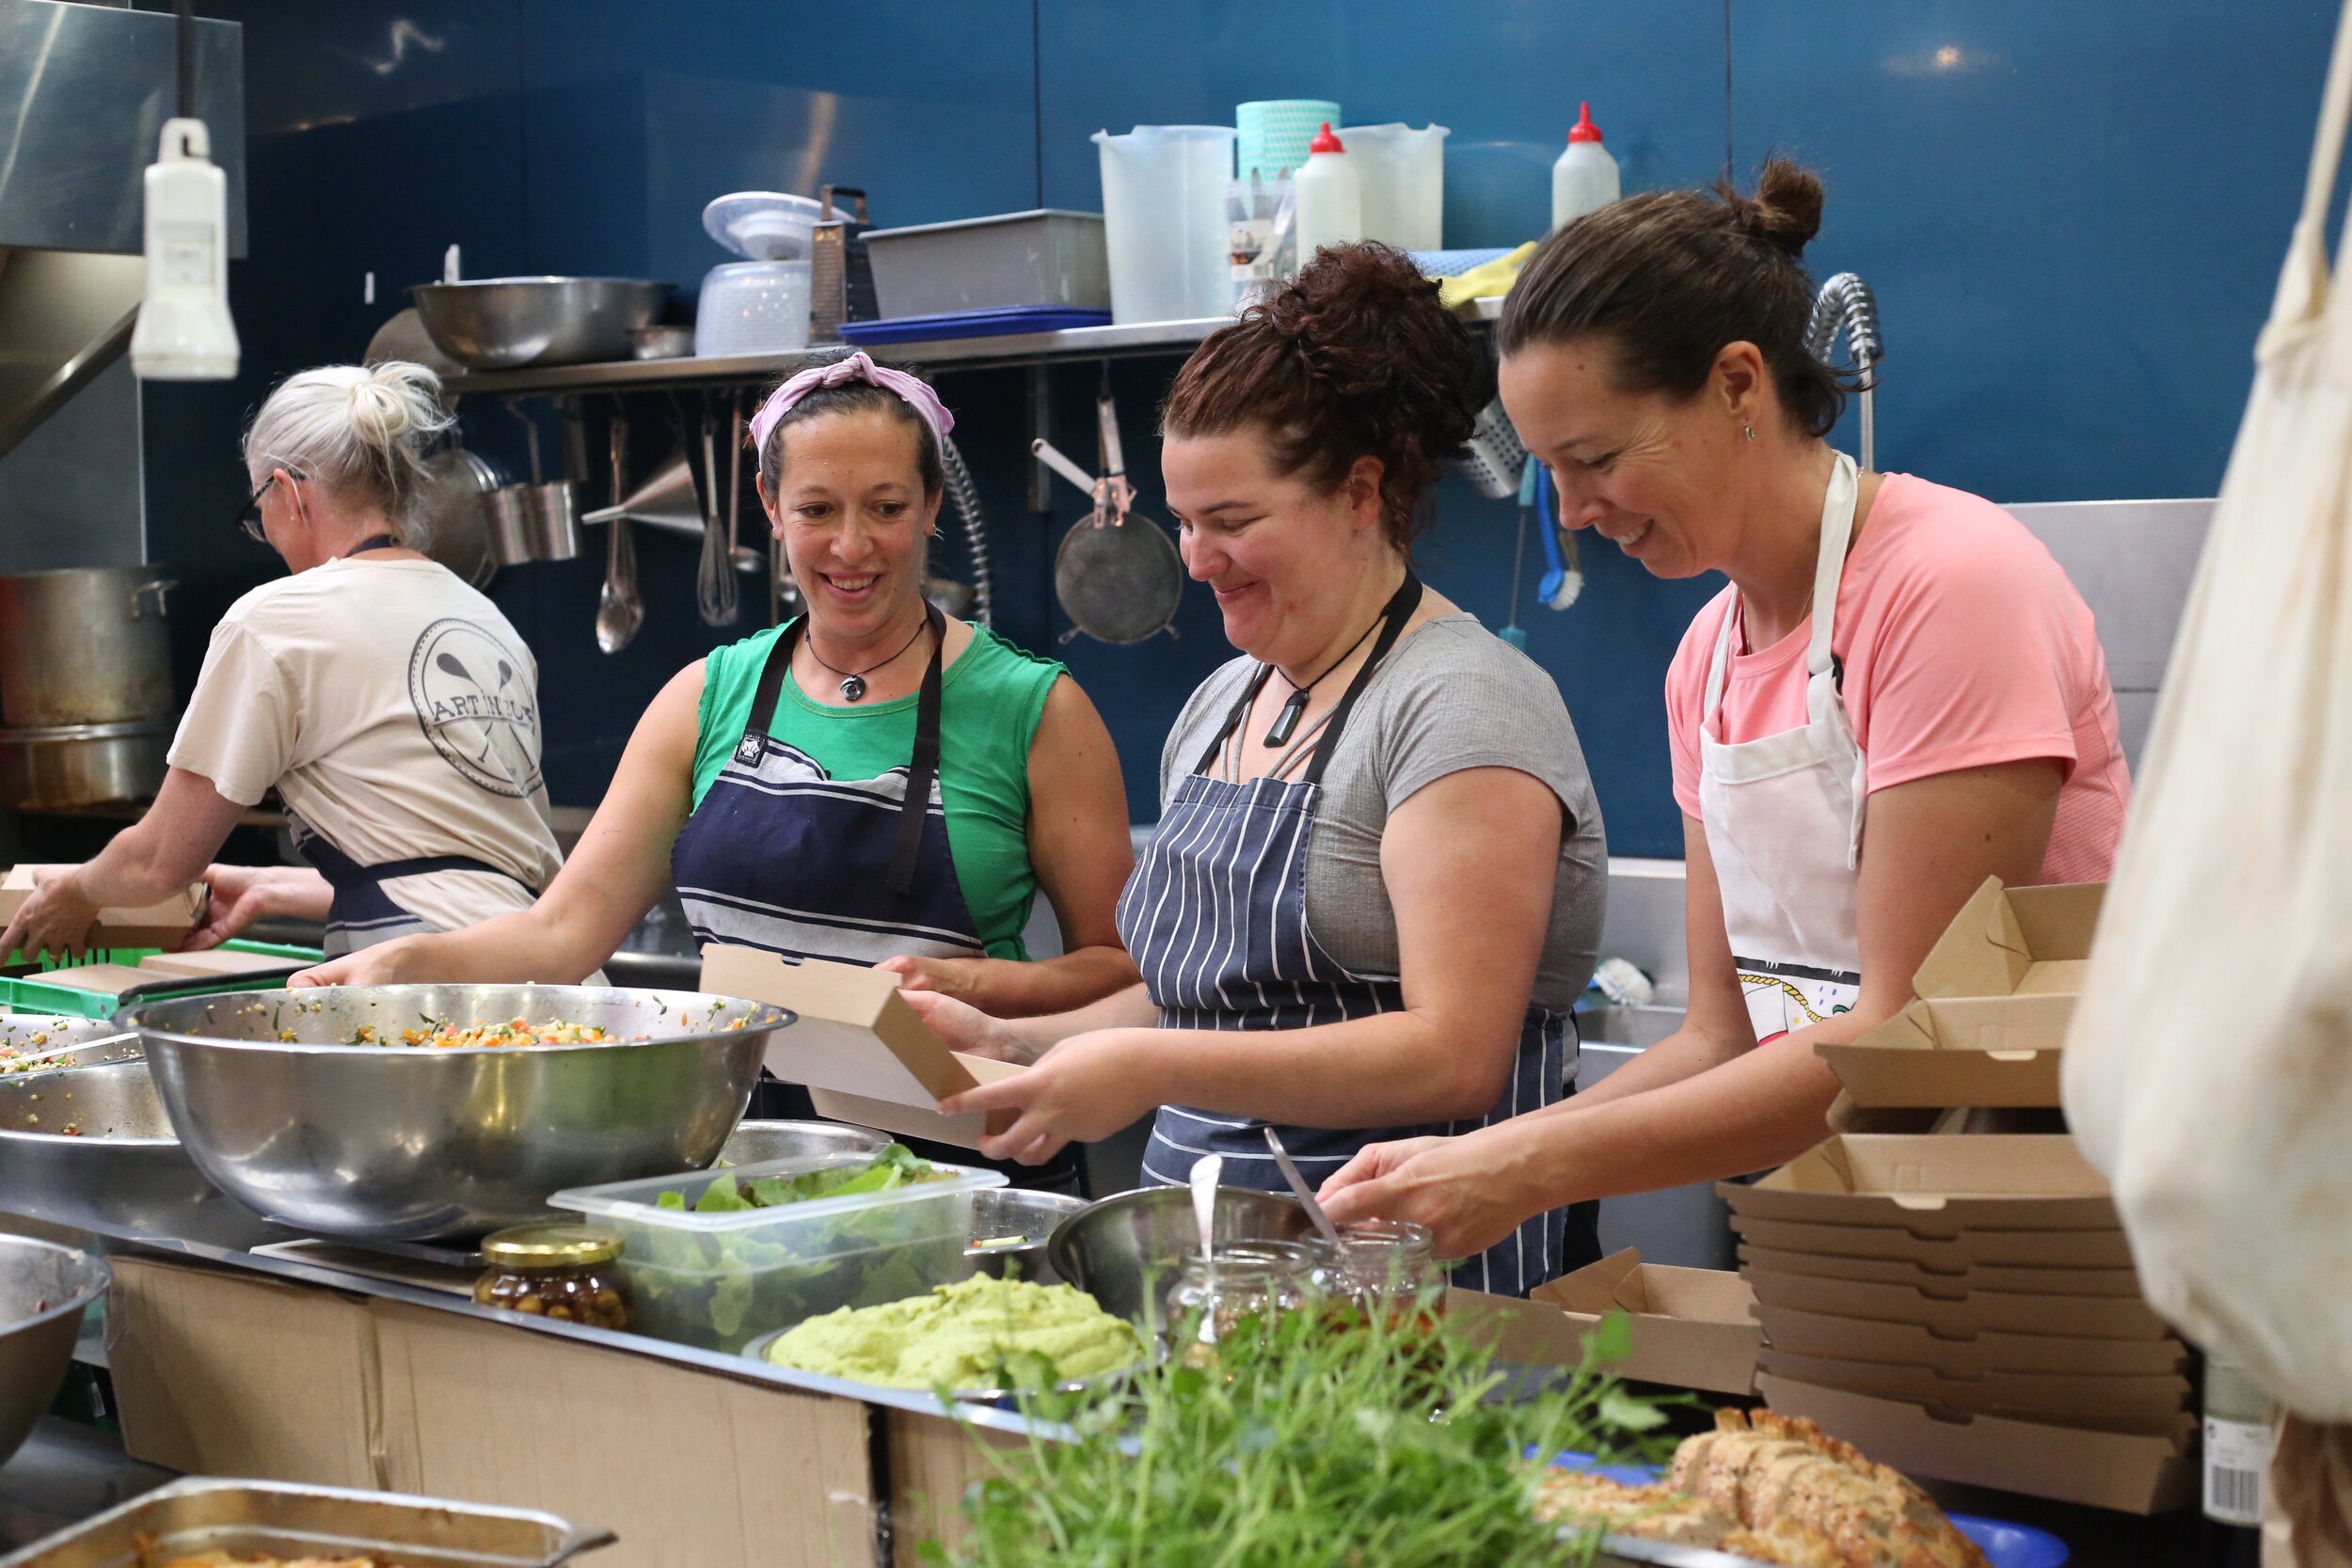 Mt Victoria - cooking team happily hard at work